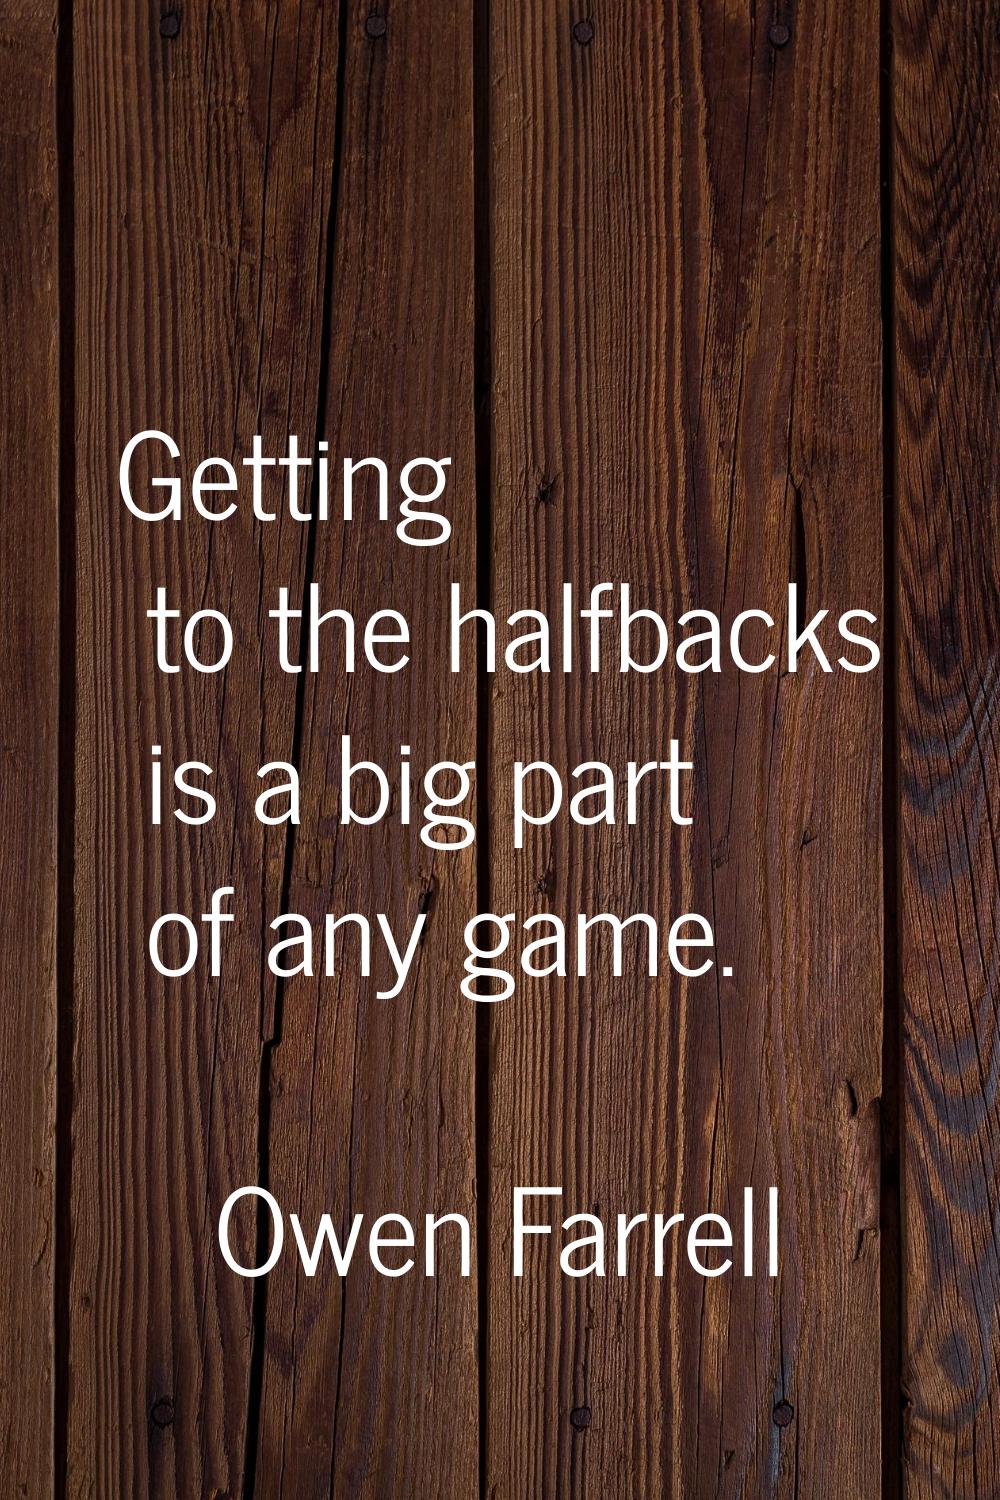 Getting to the halfbacks is a big part of any game.